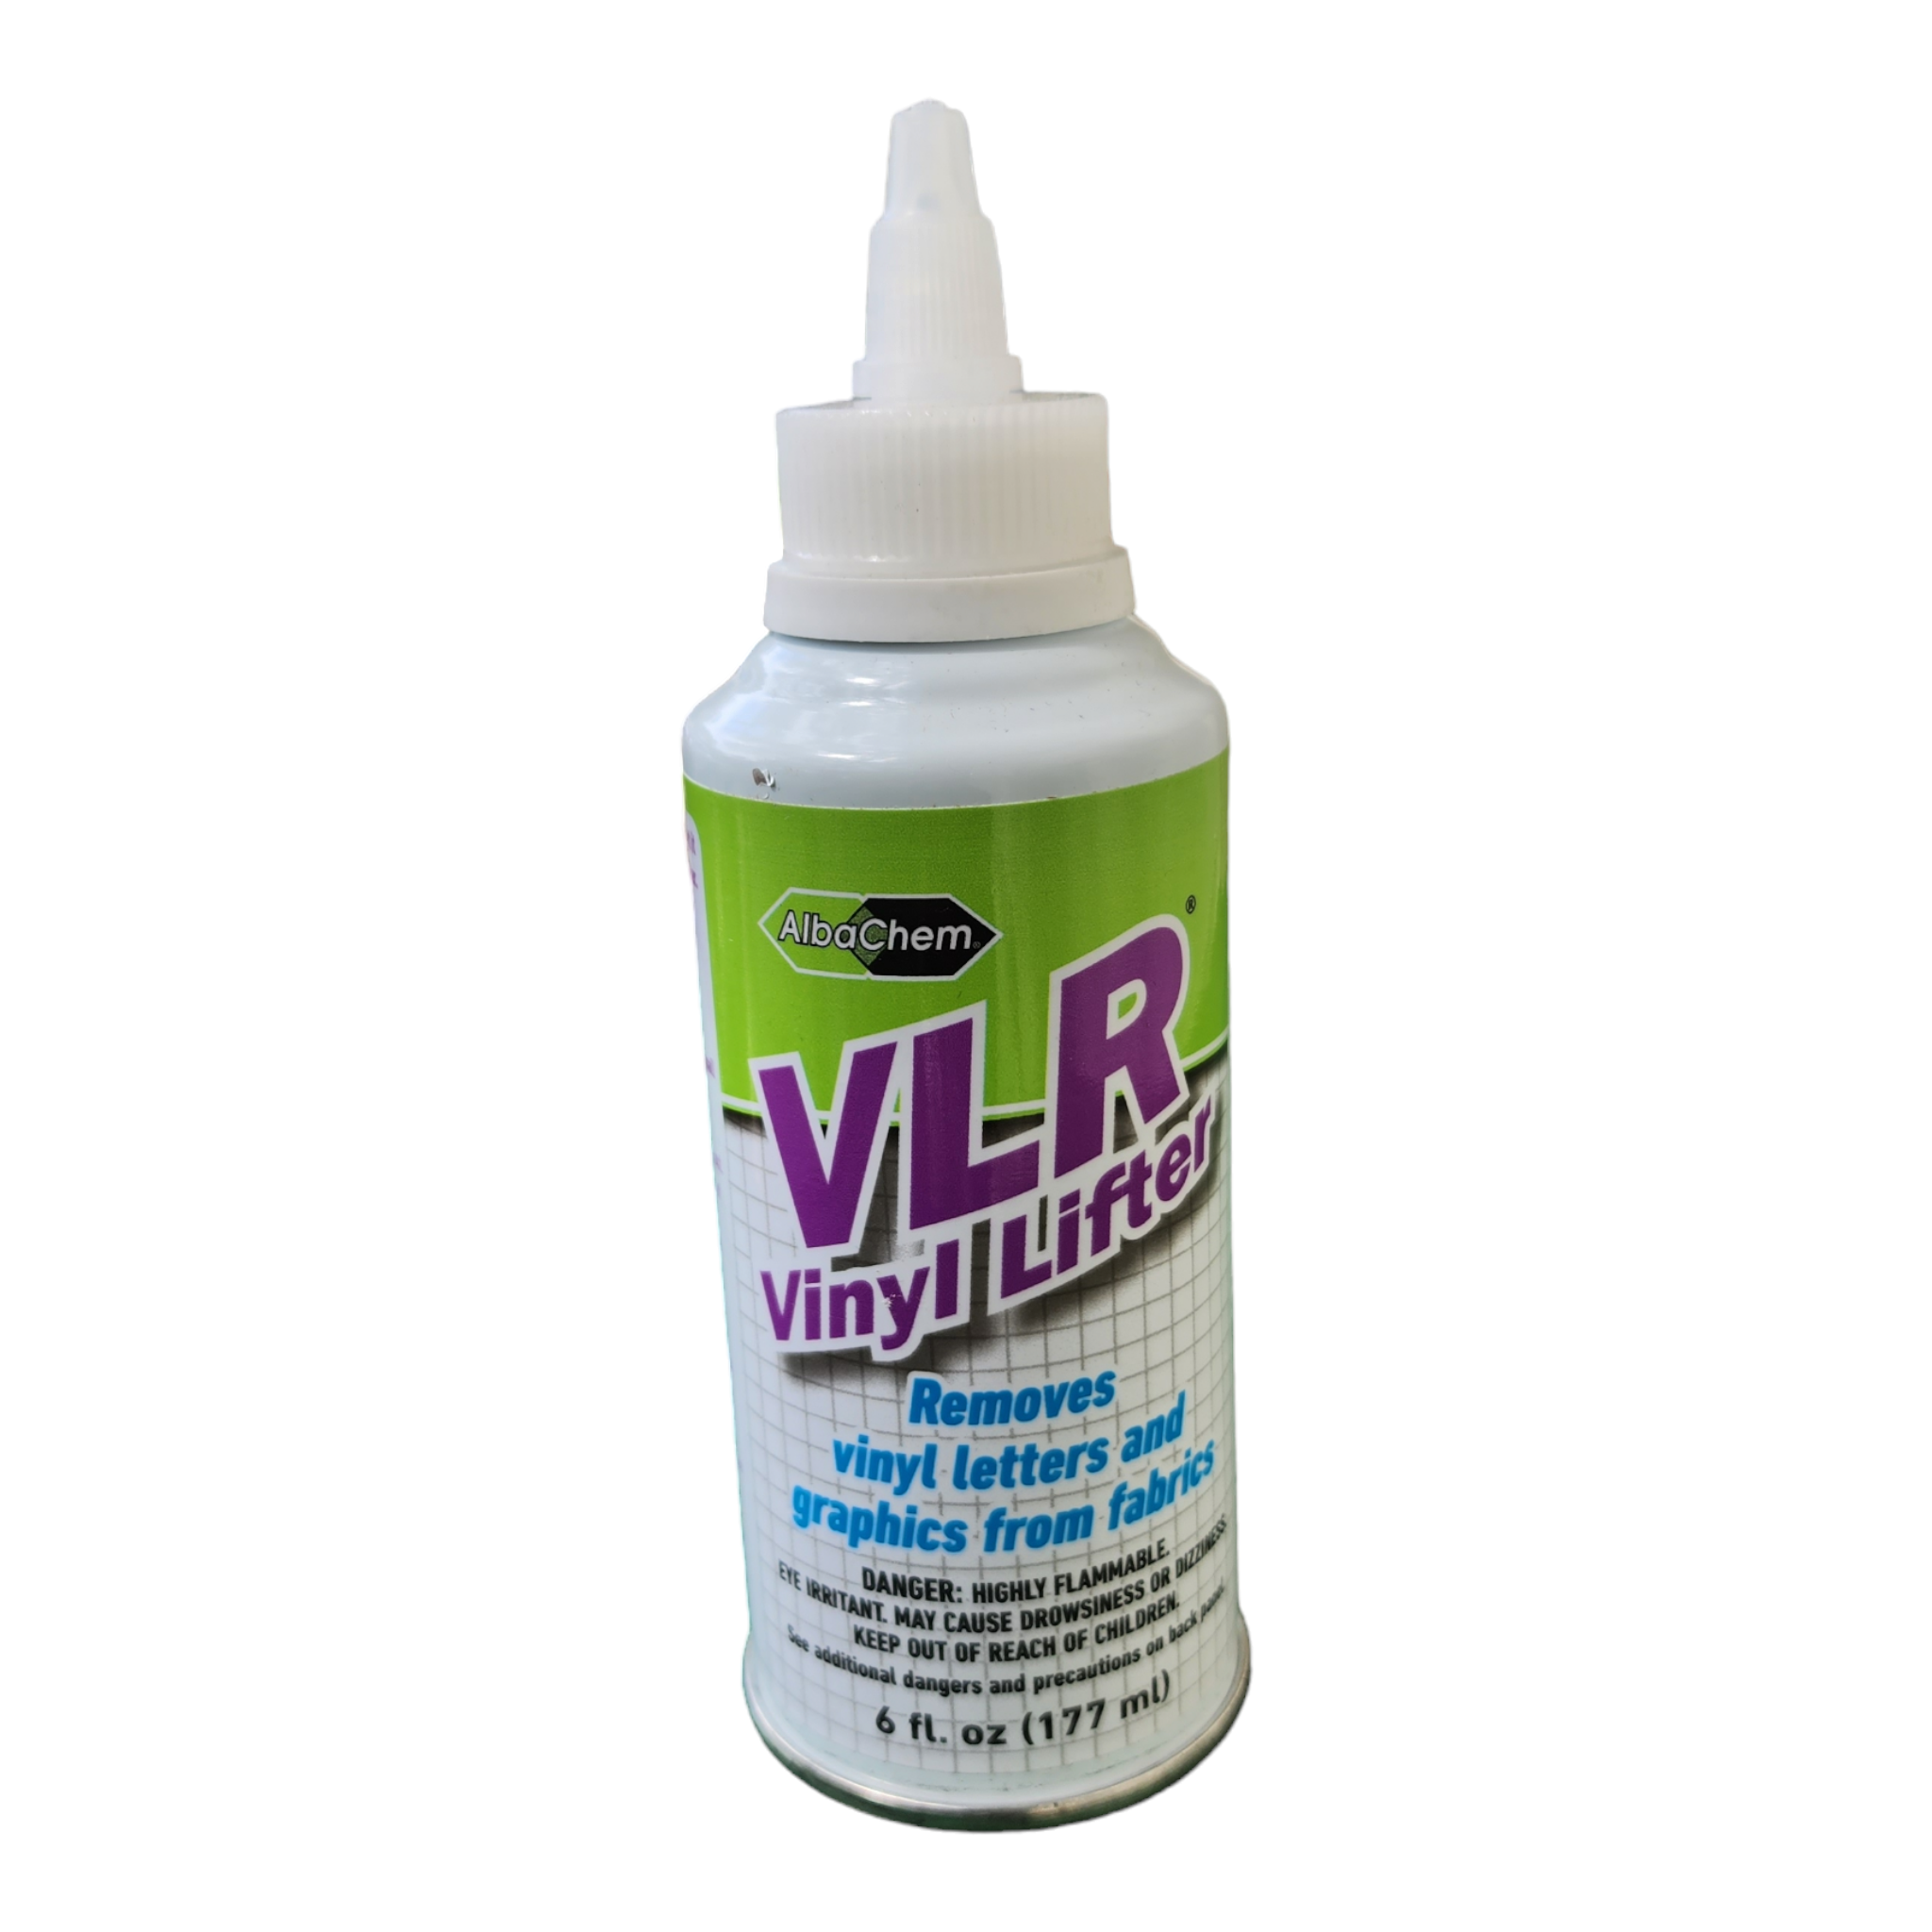 VLR Vinyl Lifter for Fabric - Fast-Drying & No Residue Vinyl Remover (6 Fl  Oz)